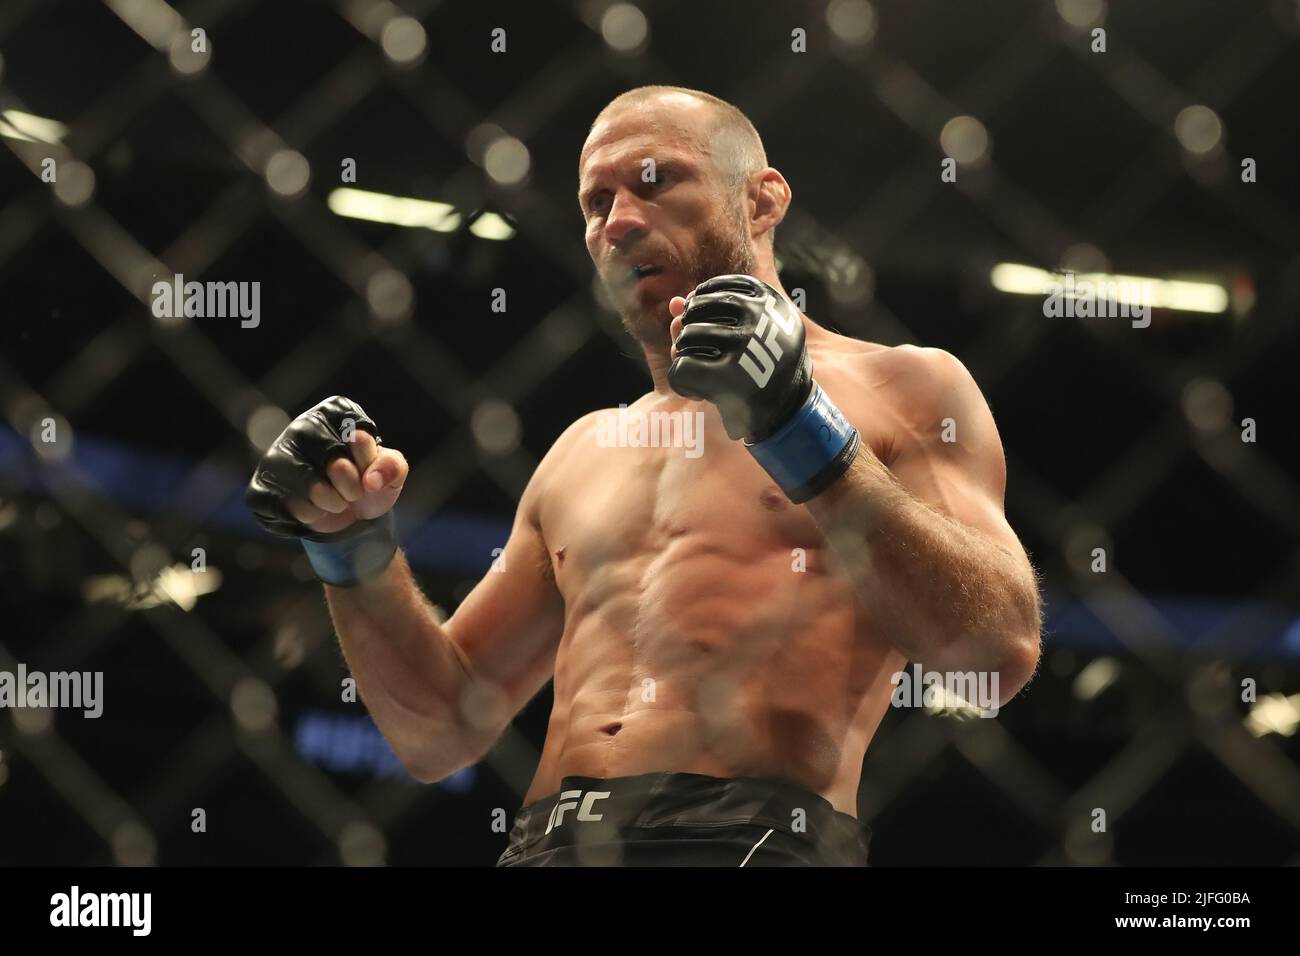 LAS VEGAS, NV - JULY 2: Donald Cerrone during the UFC 276 at the T-Mobile Arena on July 2, 2022 in Las Vegas, Nevada, United States. (Photo by Alejandro Salazar/PxImages) Stock Photo